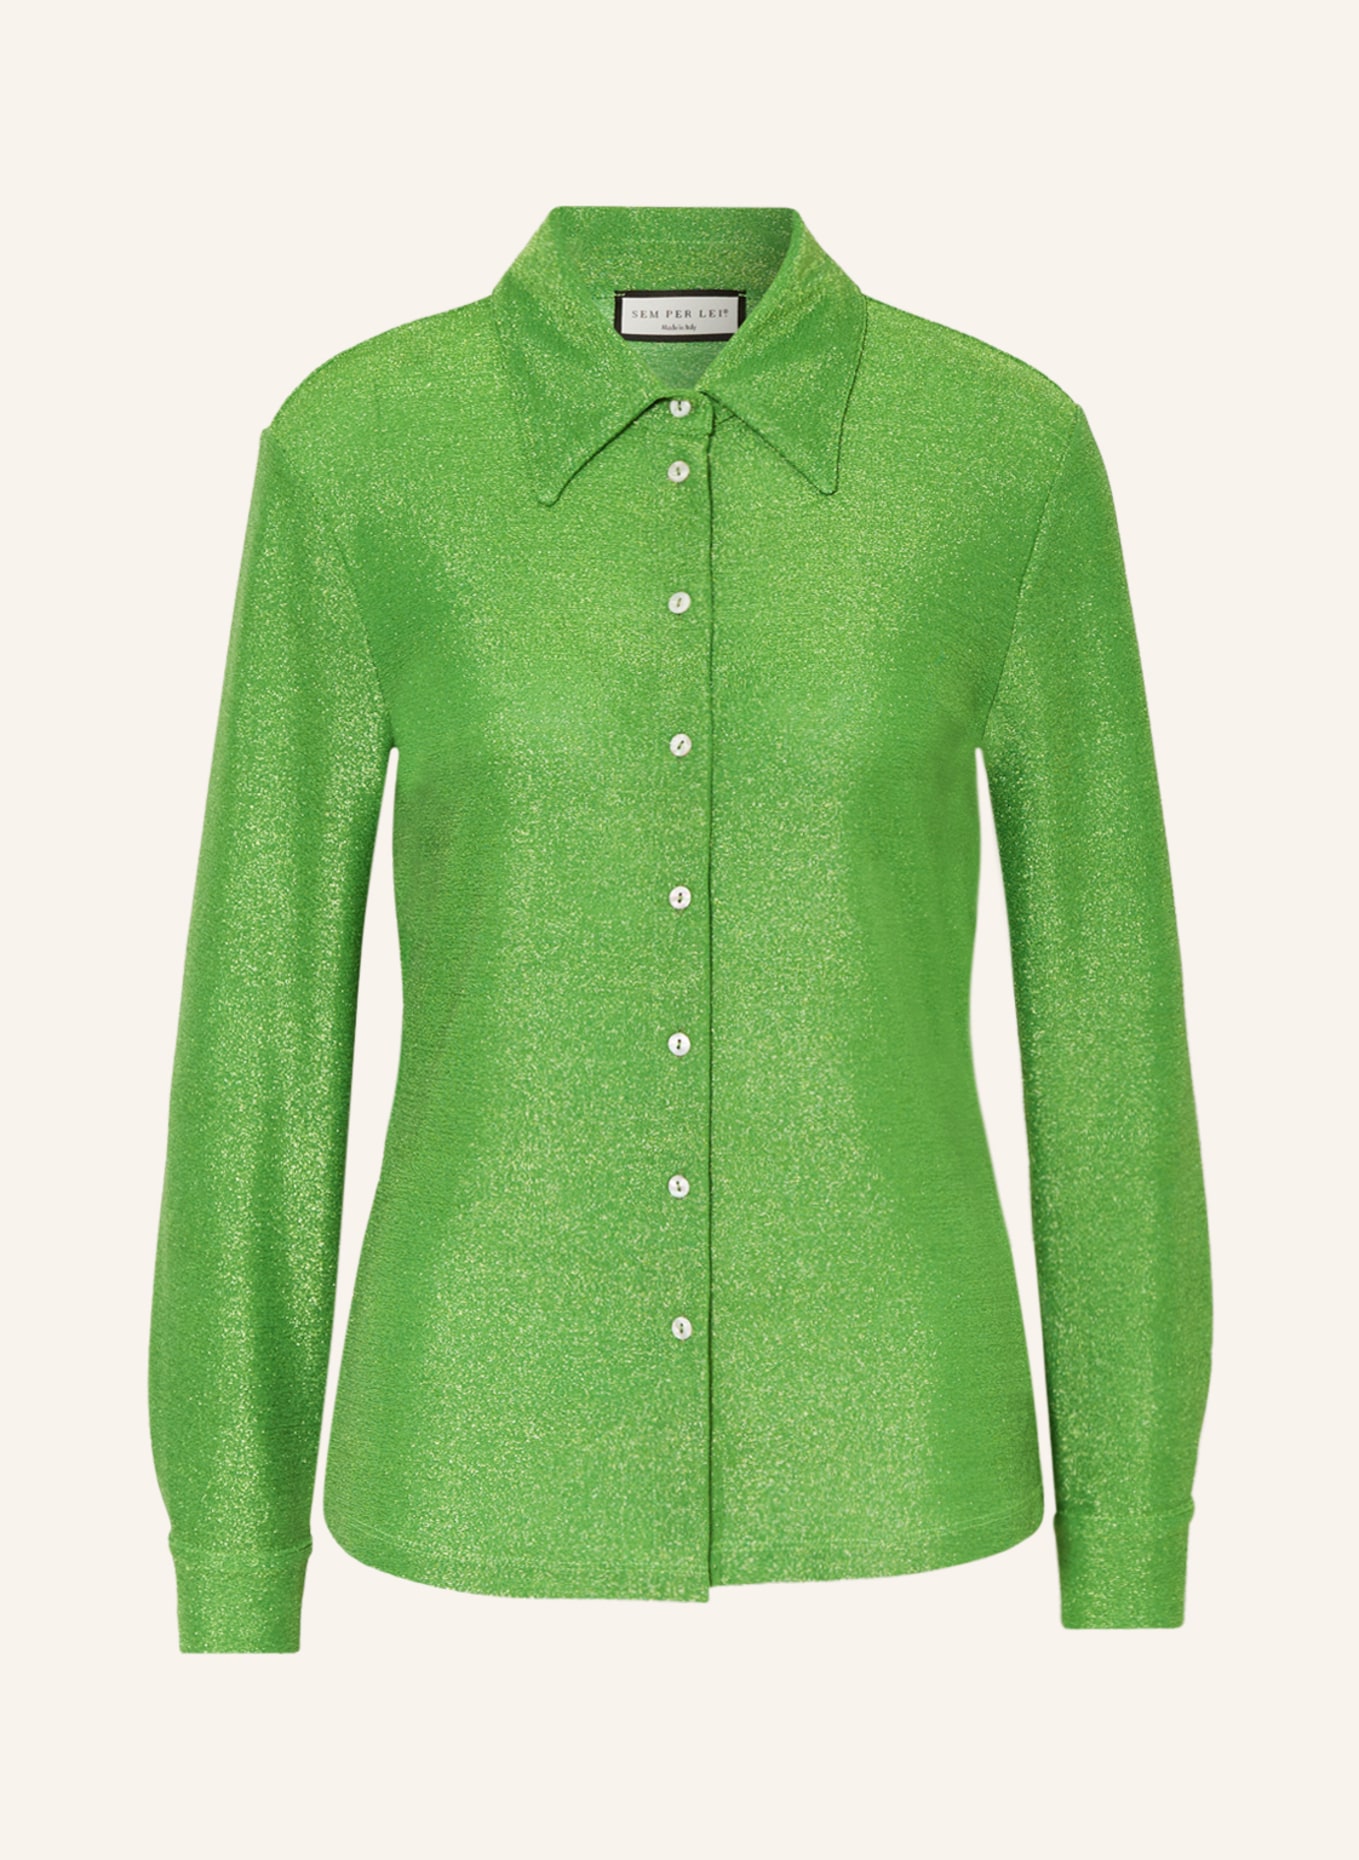 SEM PER LEI Shirt blouse with glitter thread, Color: LIGHT GREEN (Image 1)